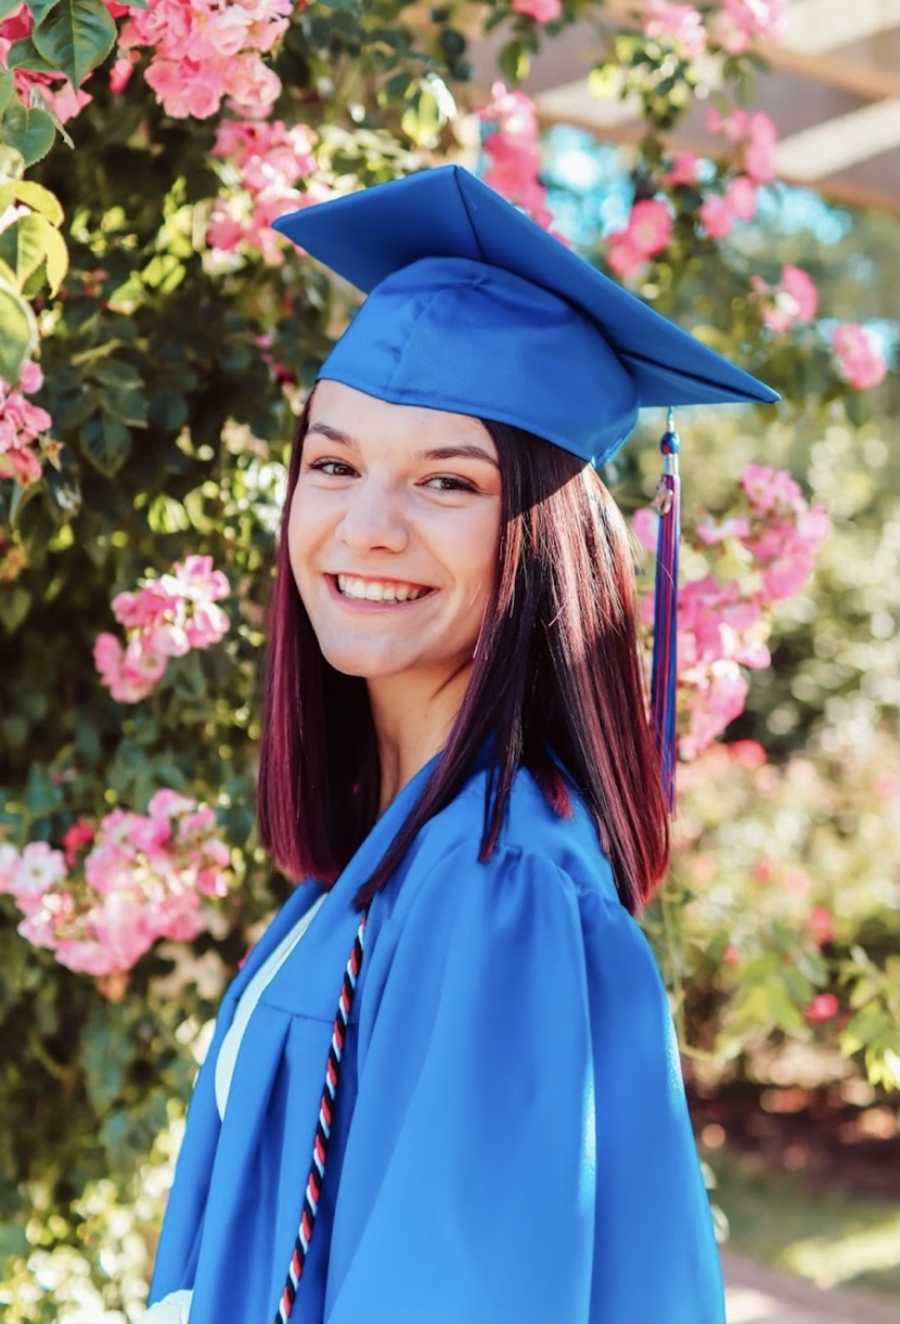 teenager in blue graduation cap and gown